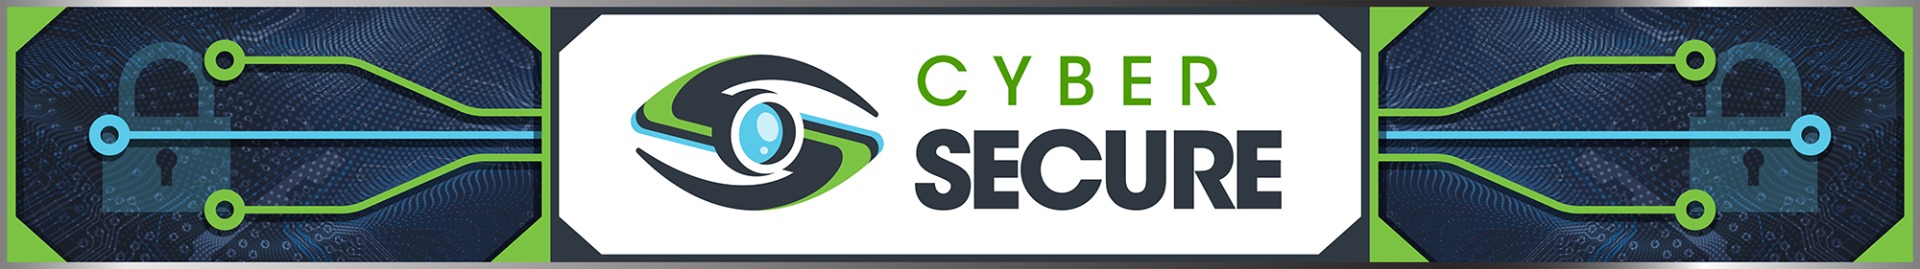 Cyber Secure How-to Videos